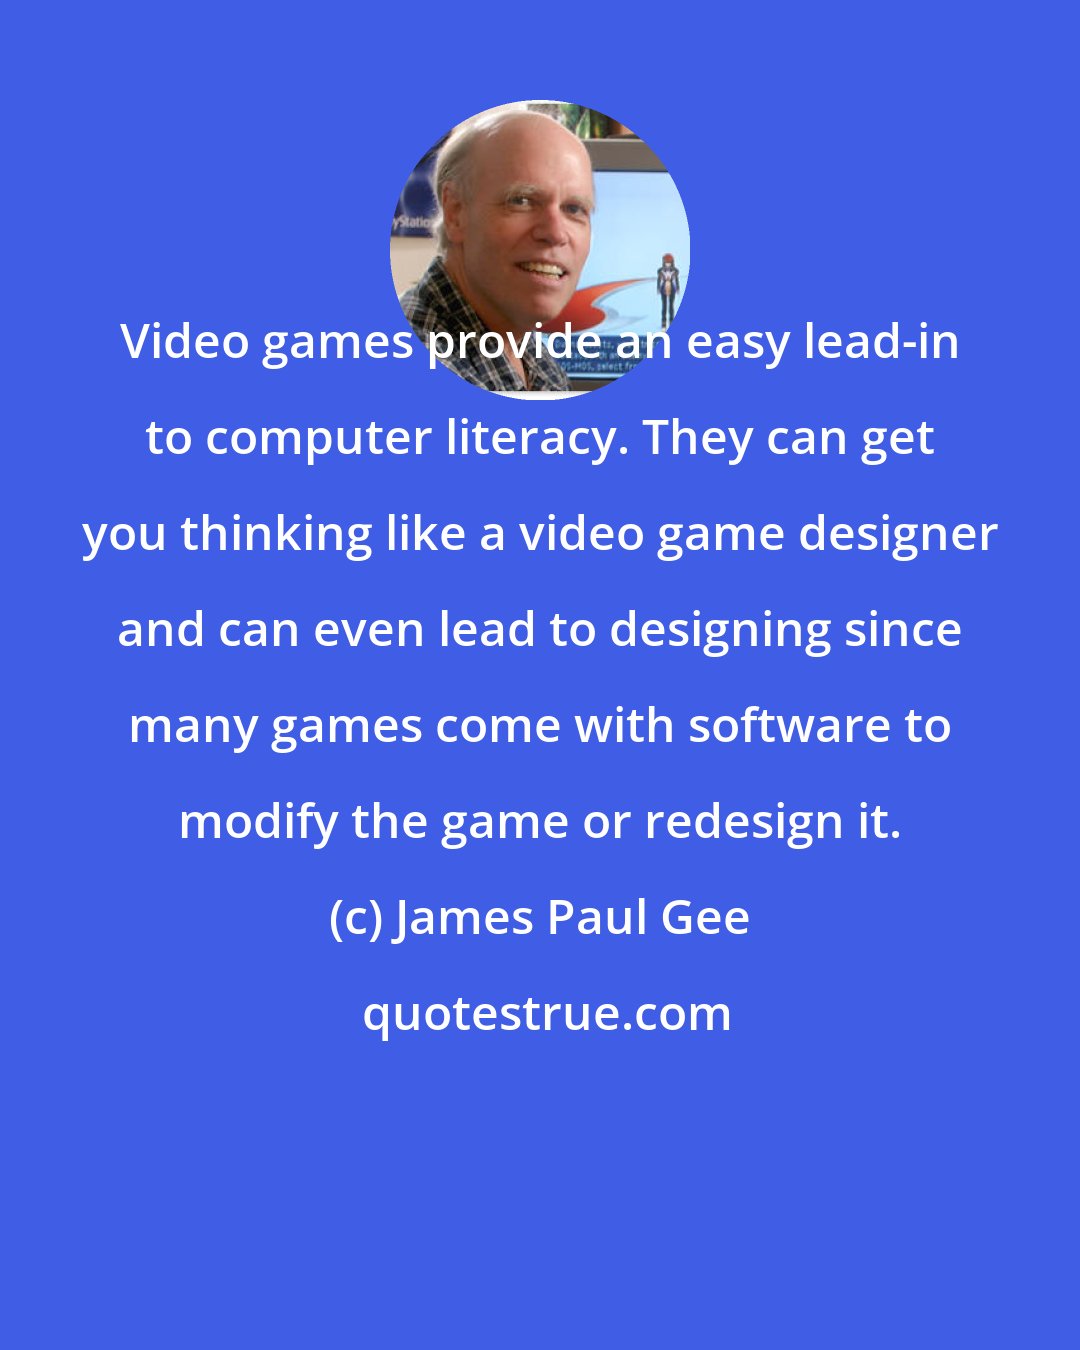 James Paul Gee: Video games provide an easy lead-in to computer literacy. They can get you thinking like a video game designer and can even lead to designing since many games come with software to modify the game or redesign it.